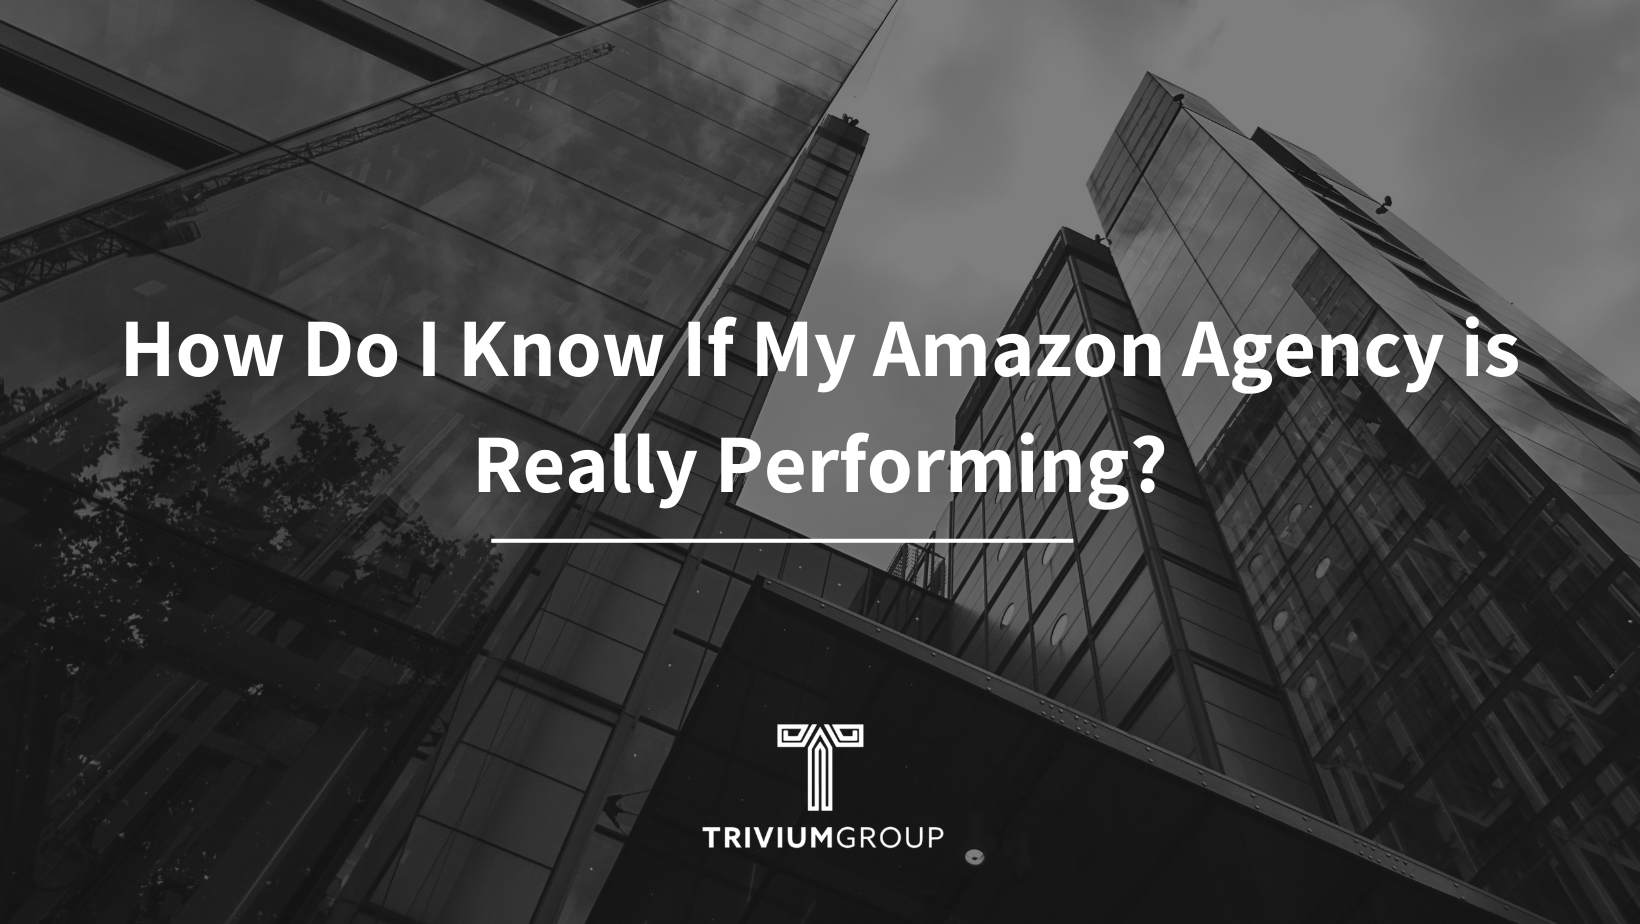 How do I know if my Amazon agency is really performing?